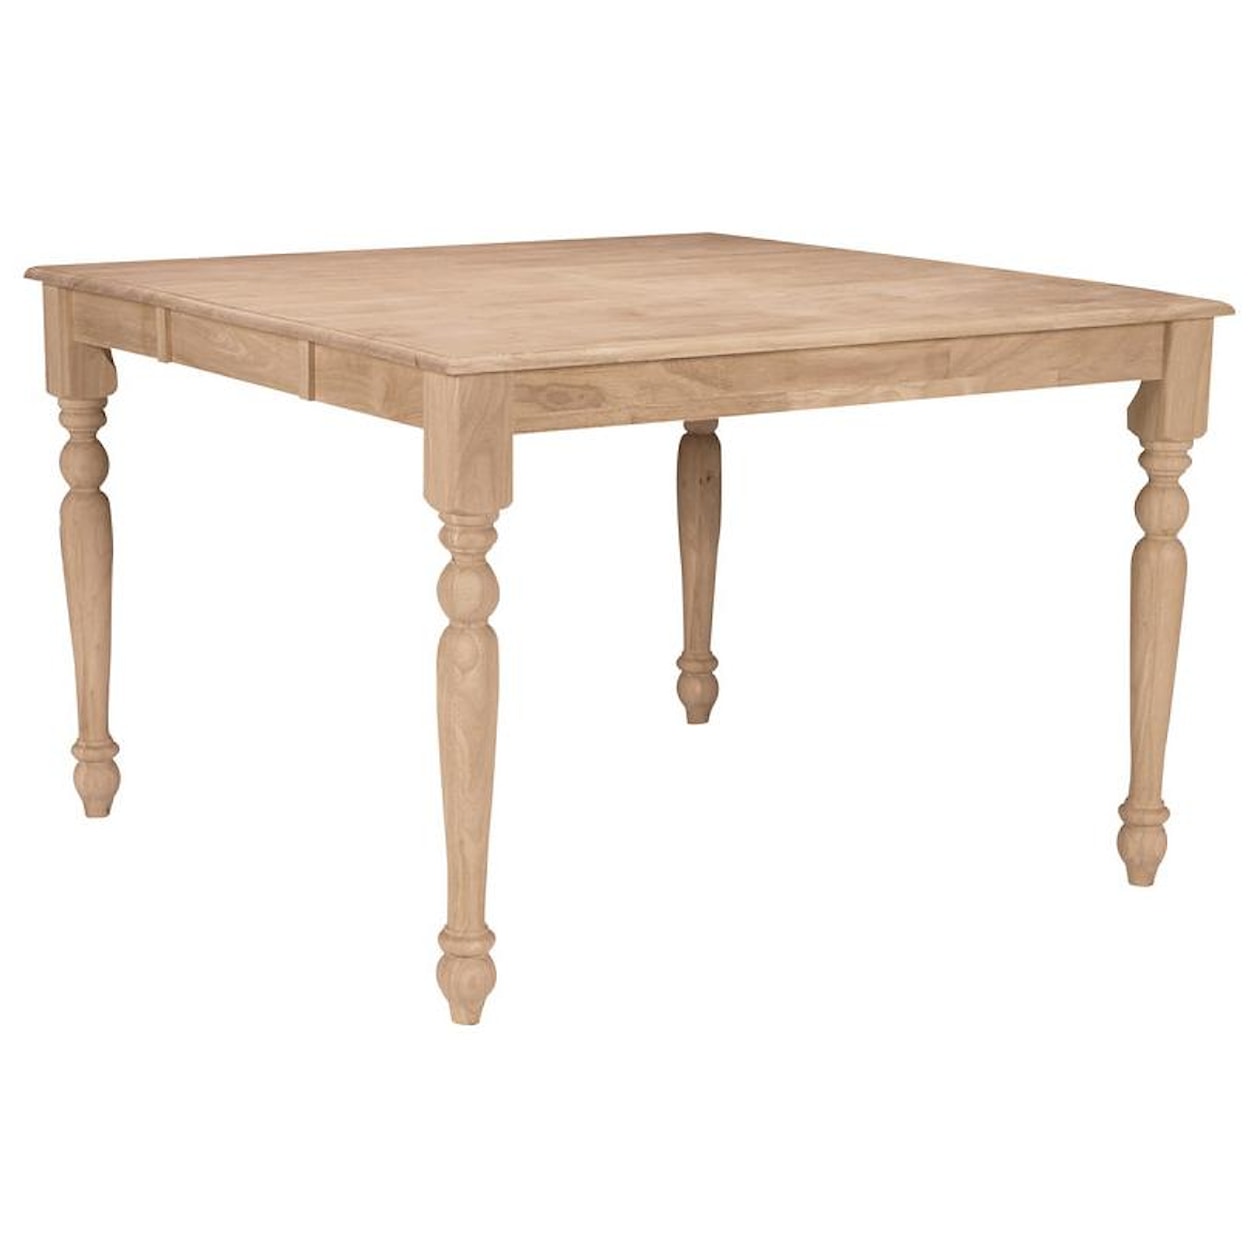 John Thomas SELECT Dining Room Butterfly Leaf Gathering Table with Turned L